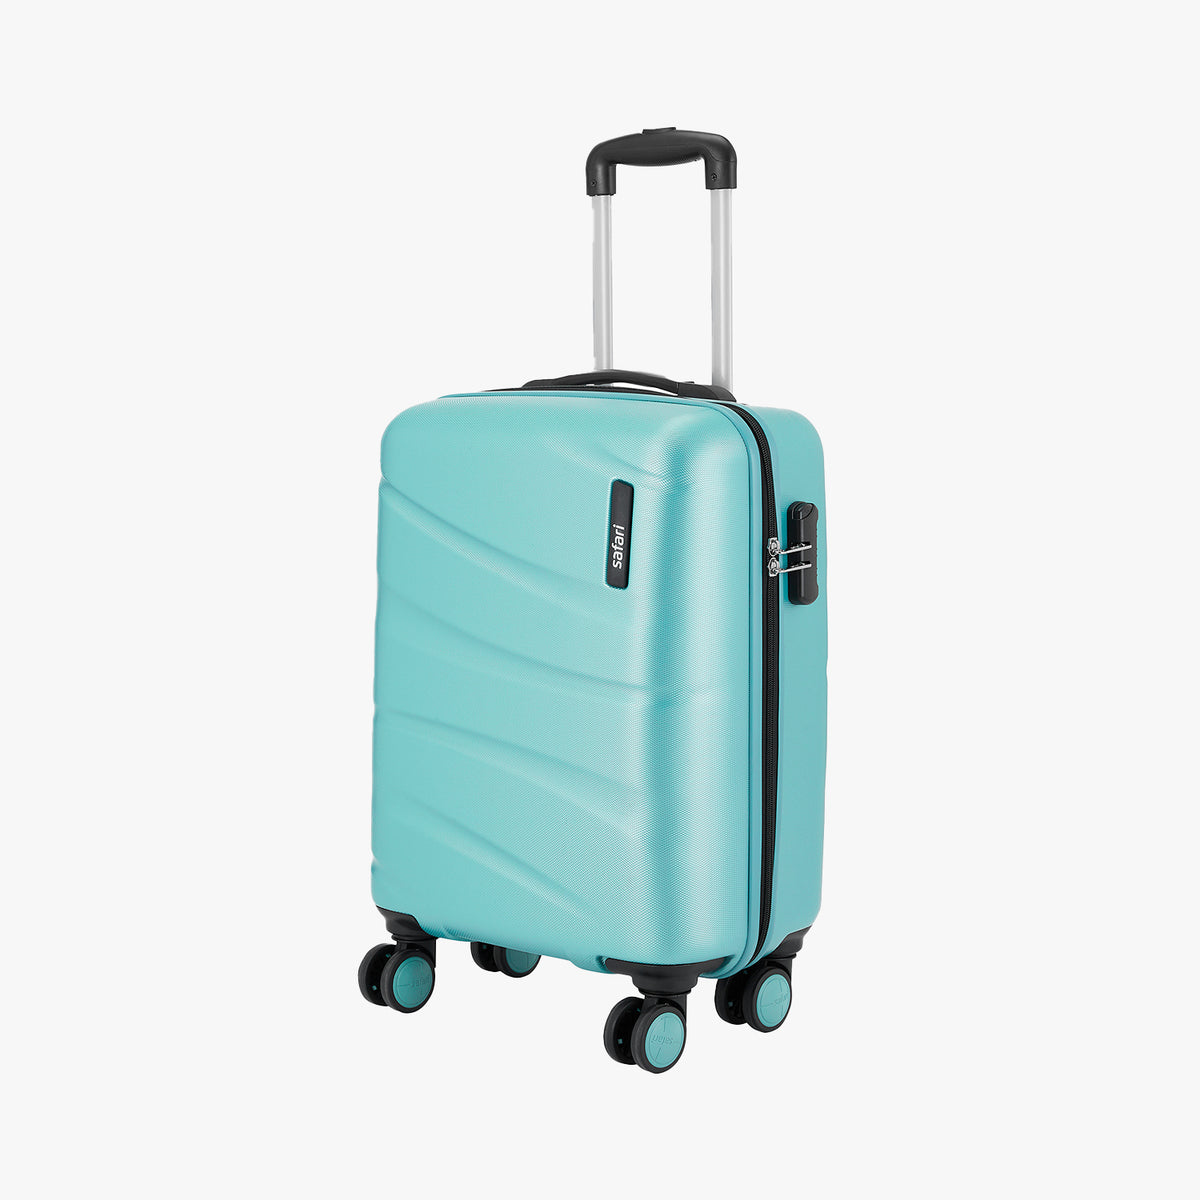 Buy Safari Anti Theft Trolley Bag Set, Small and Medium Size Blue Suitcase,  8 Wheel Softside Polyester Luggage Bags for Travel, 59 cm and 71 cm Cabin Luggage  Trolley for Men and